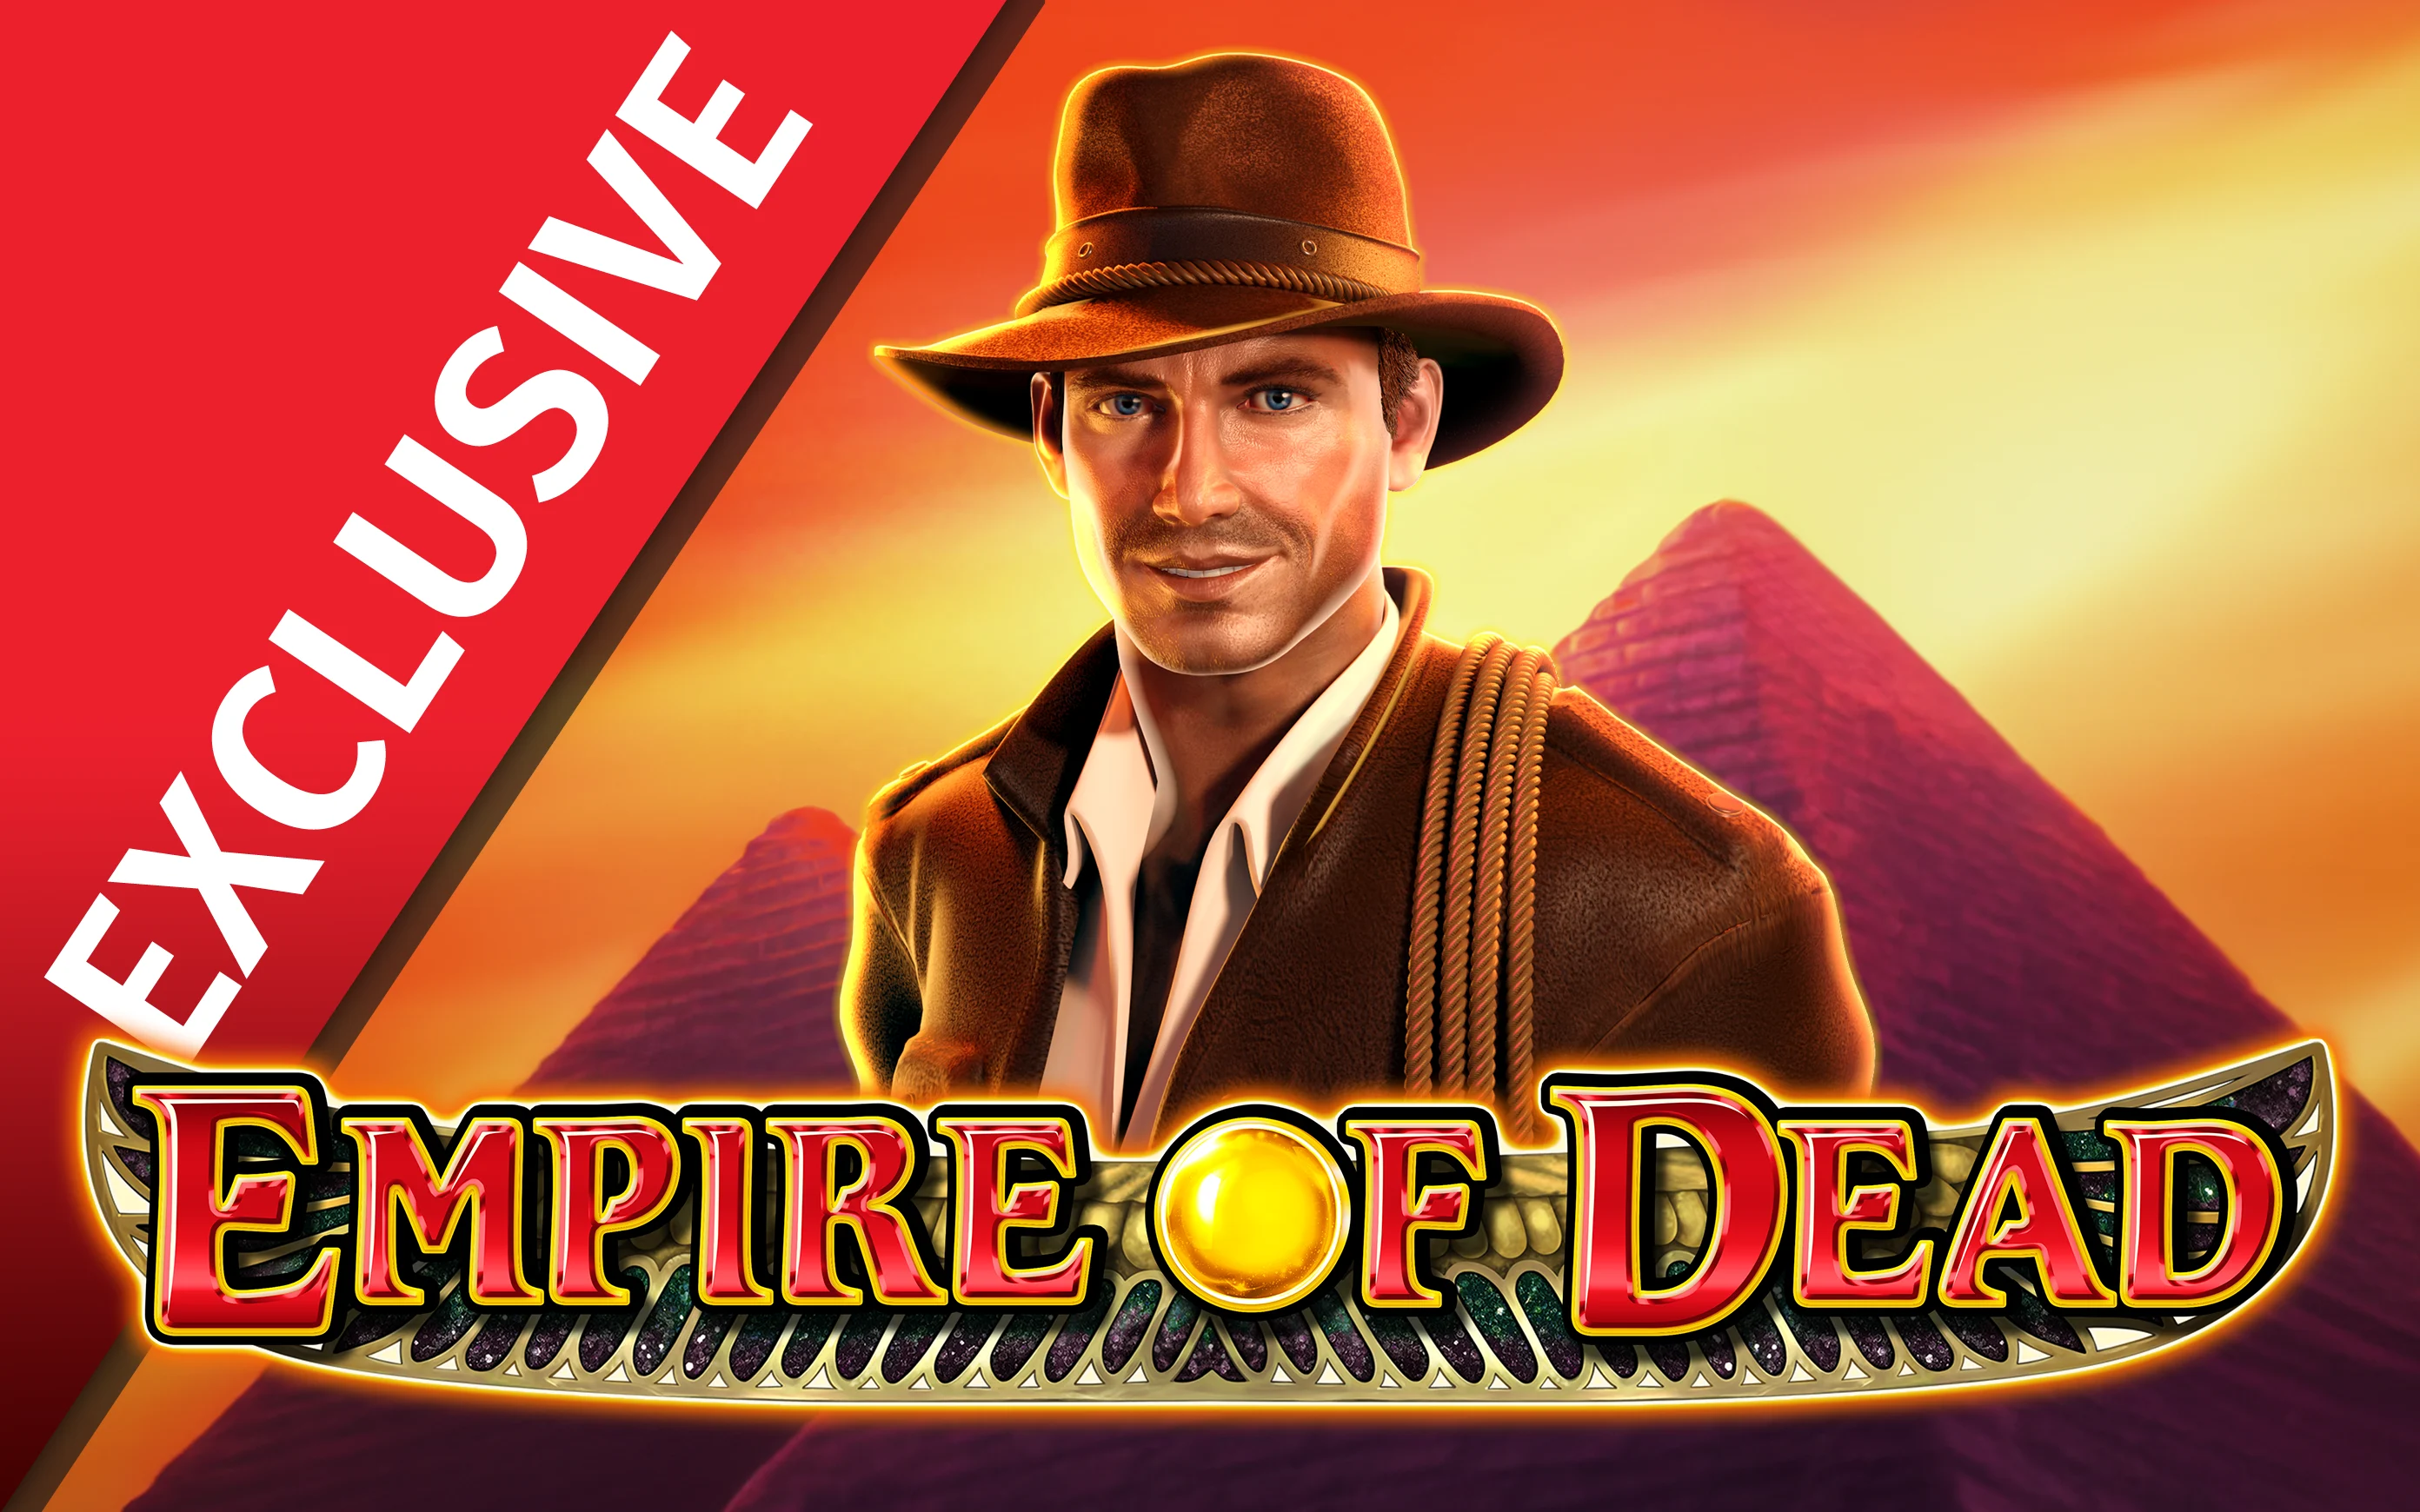 Play Empire of Dead on Starcasino.be online casino